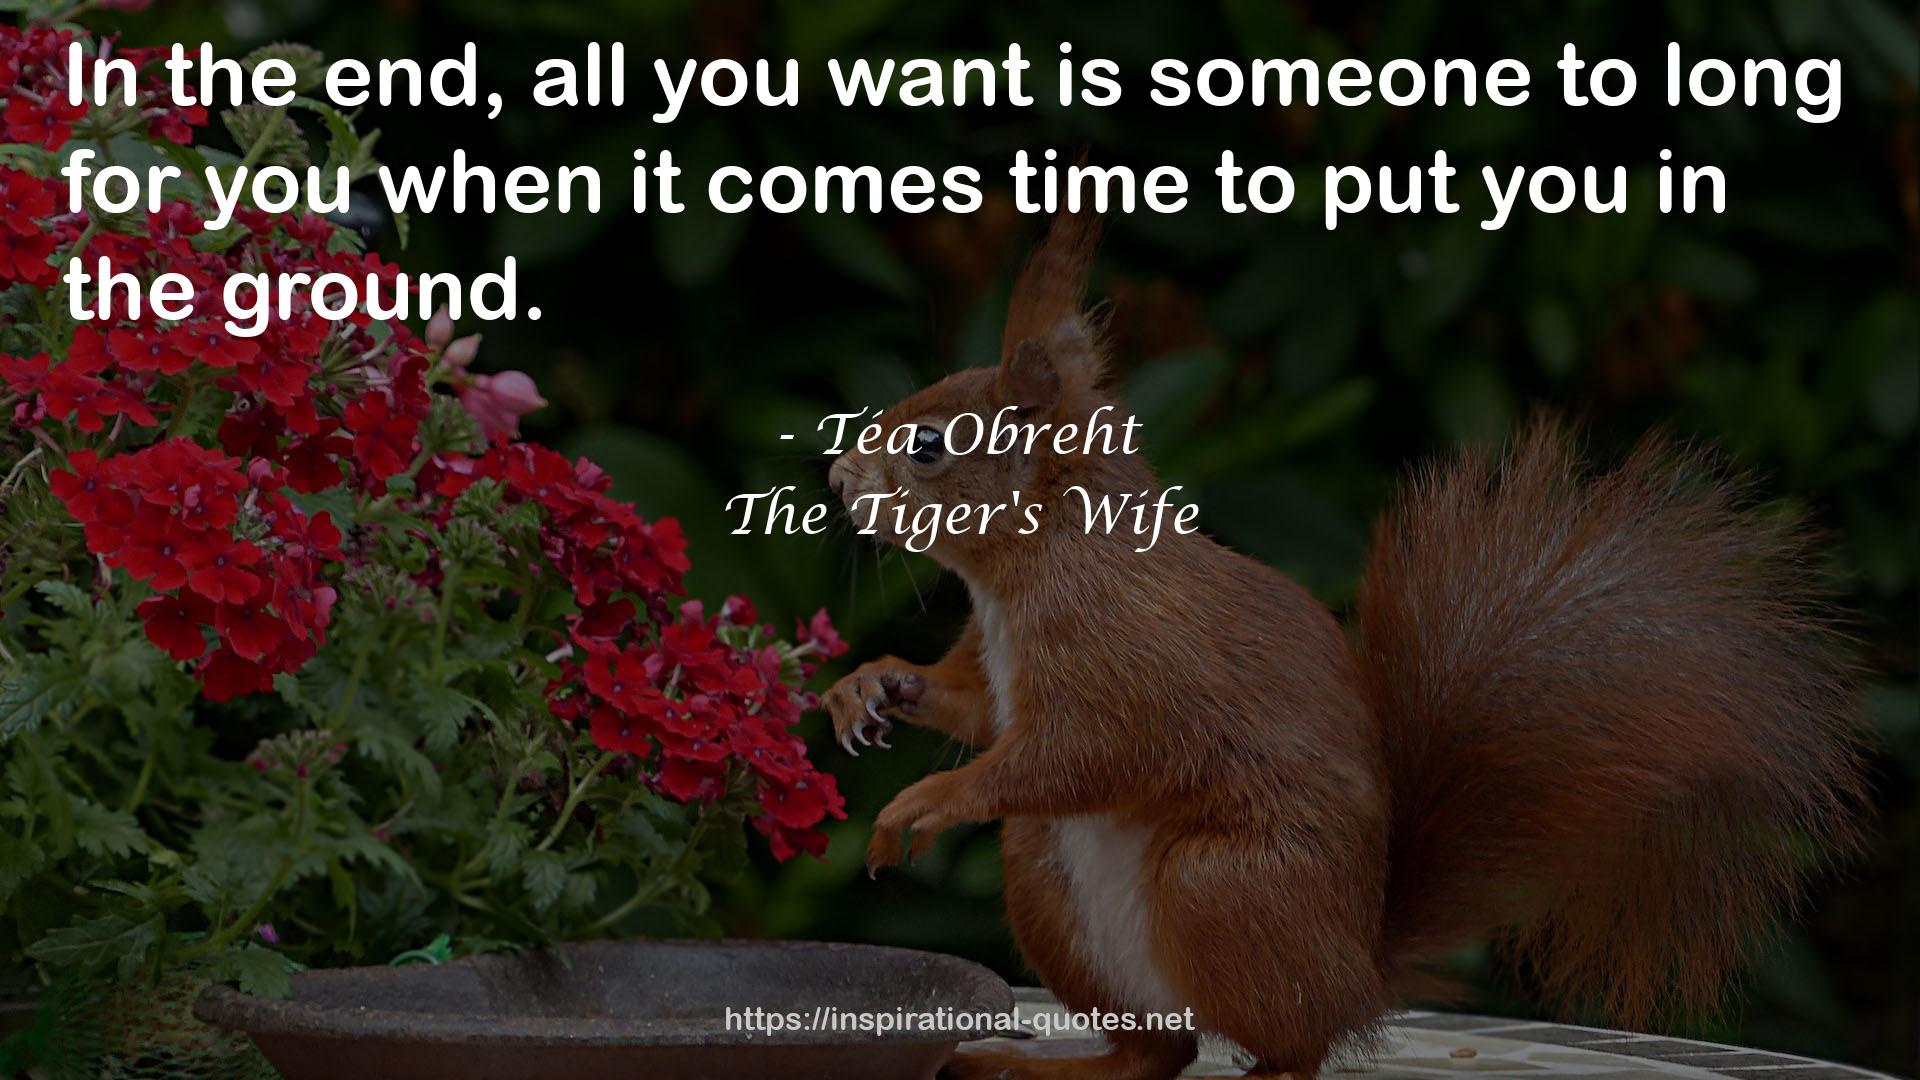 The Tiger's Wife QUOTES